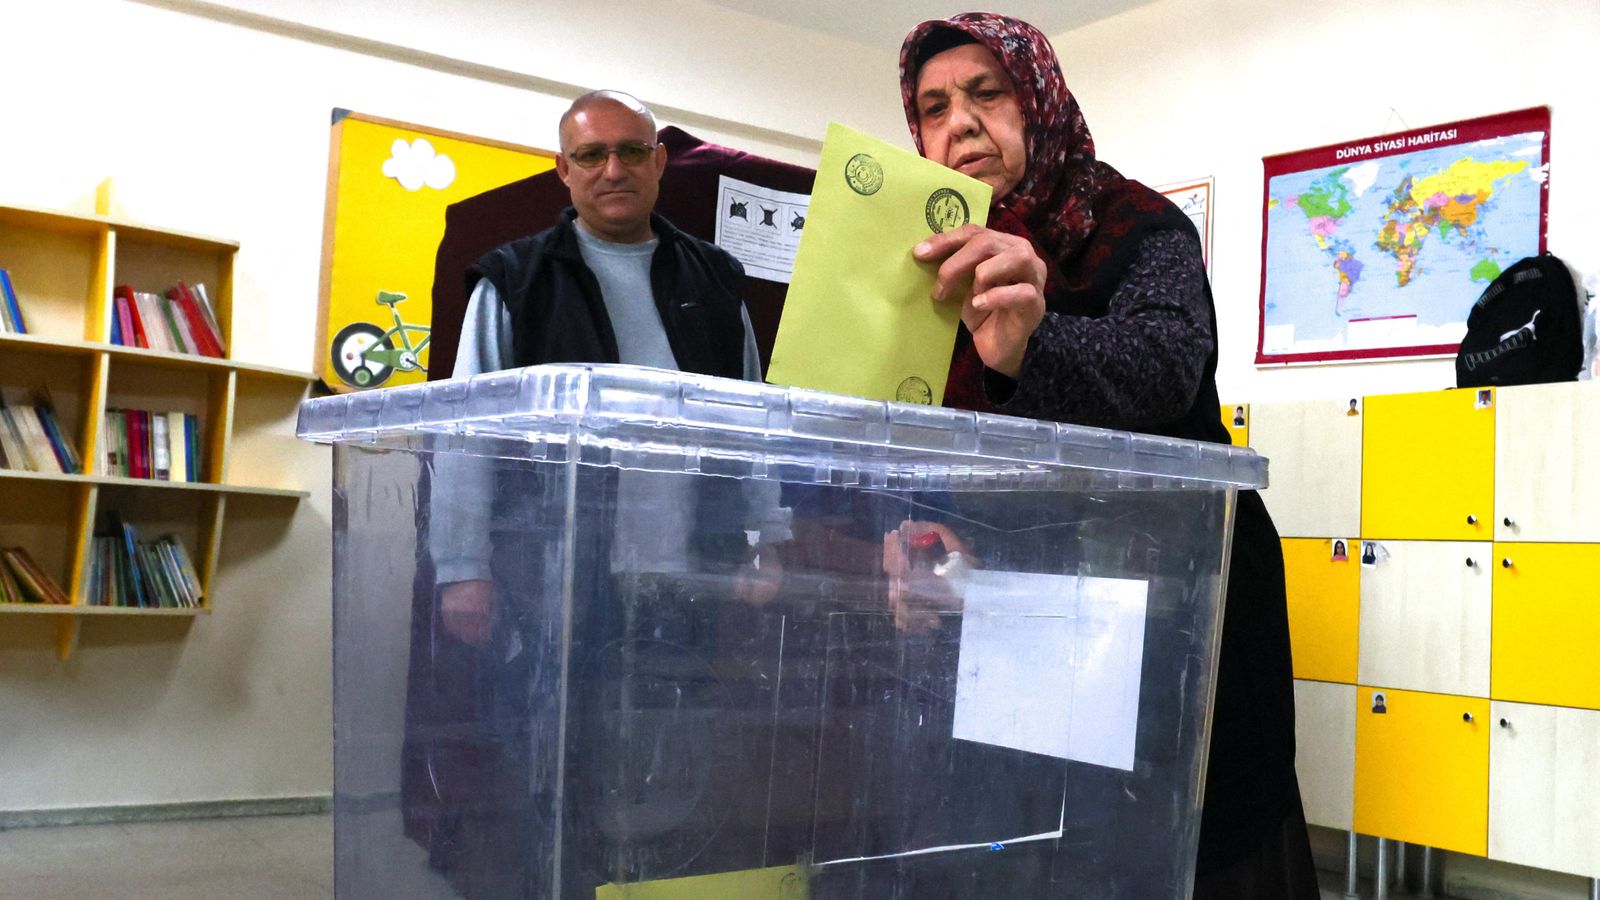 Turkey election: Turks head to the polls to decide if Recep Tayyip Erdogan takes rule into third decade